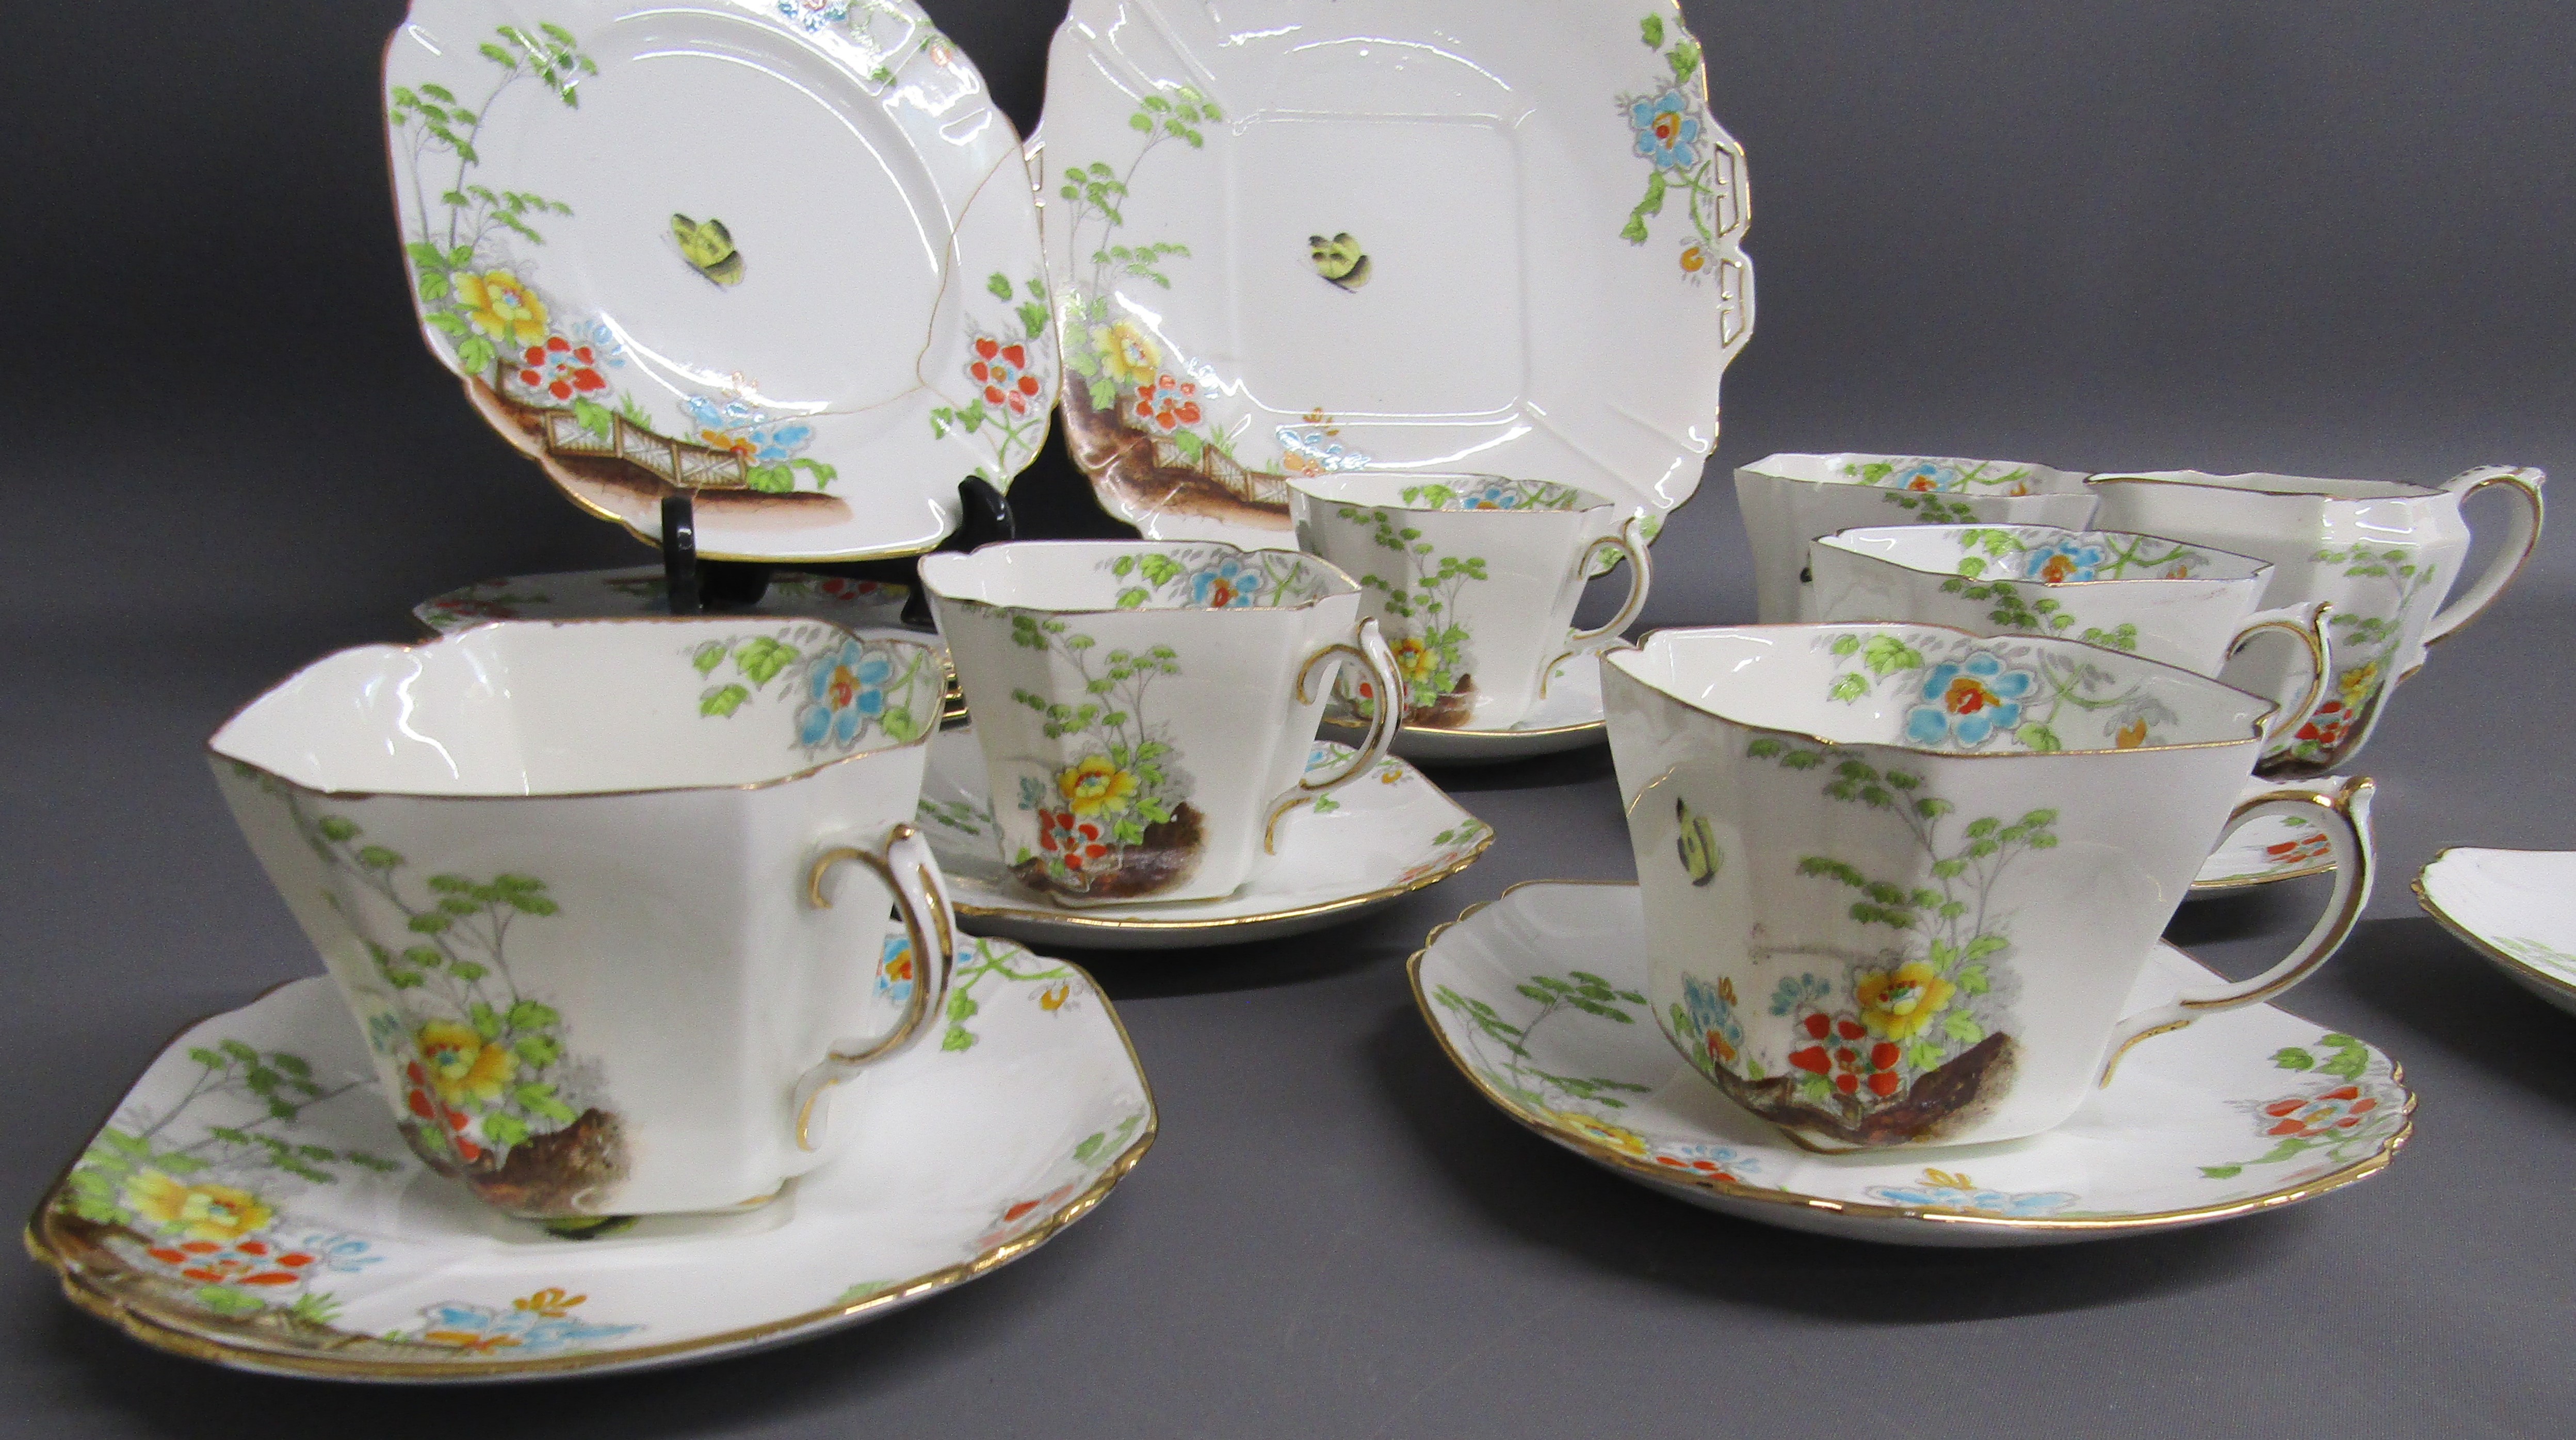 Victoria C & E bone China teacups, saucers, cake plates, side plates (one repaired), sugar bowl - Image 2 of 5